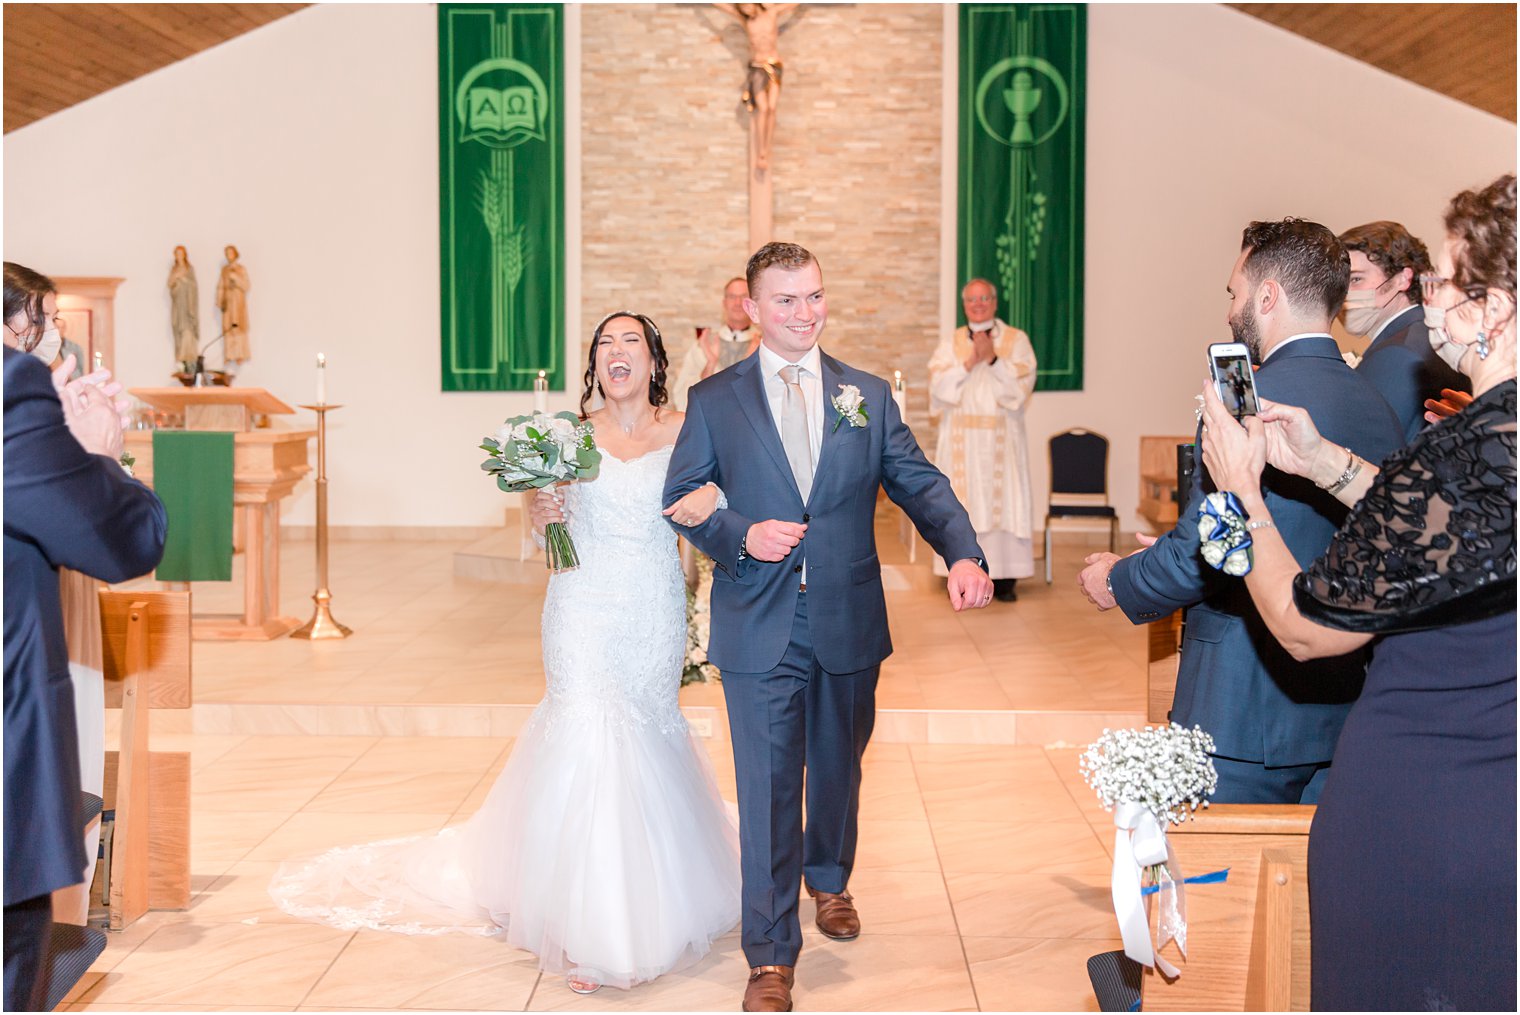 newlyweds leave church after traditional church wedding in New Jersey